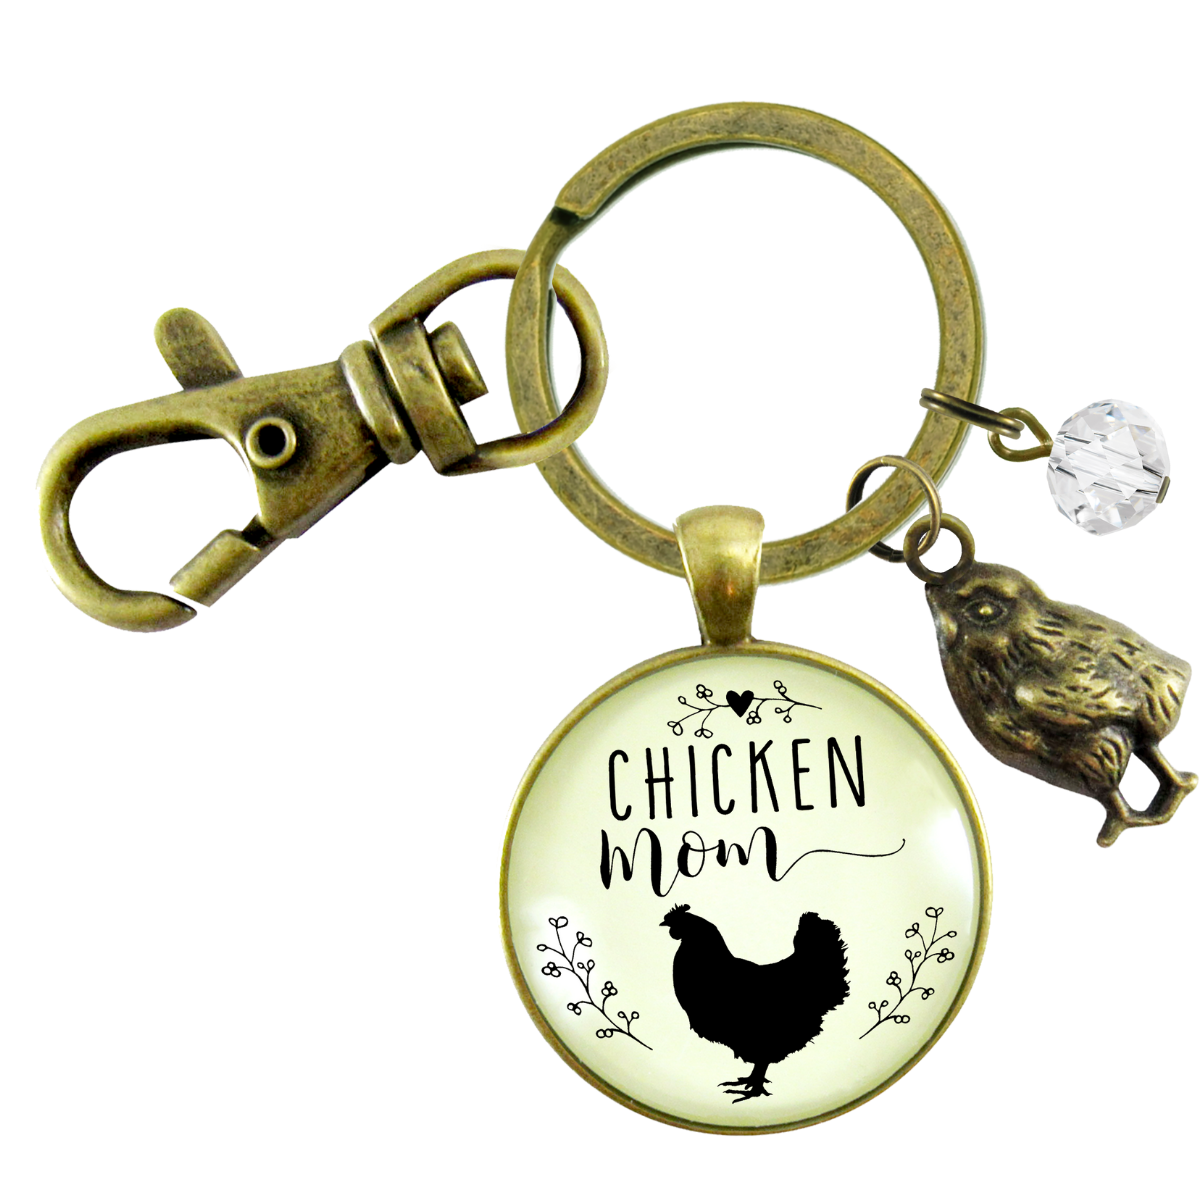 Chicken Mom Keychain Chick Gift For Mother Vintage Farm Life Inspired Baby Charm - Gutsy Goodness Handmade Jewelry;Chicken Mom Keychain Chick Gift For Mother Vintage Farm Life Inspired Baby Charm - Gutsy Goodness Handmade Jewelry Gifts